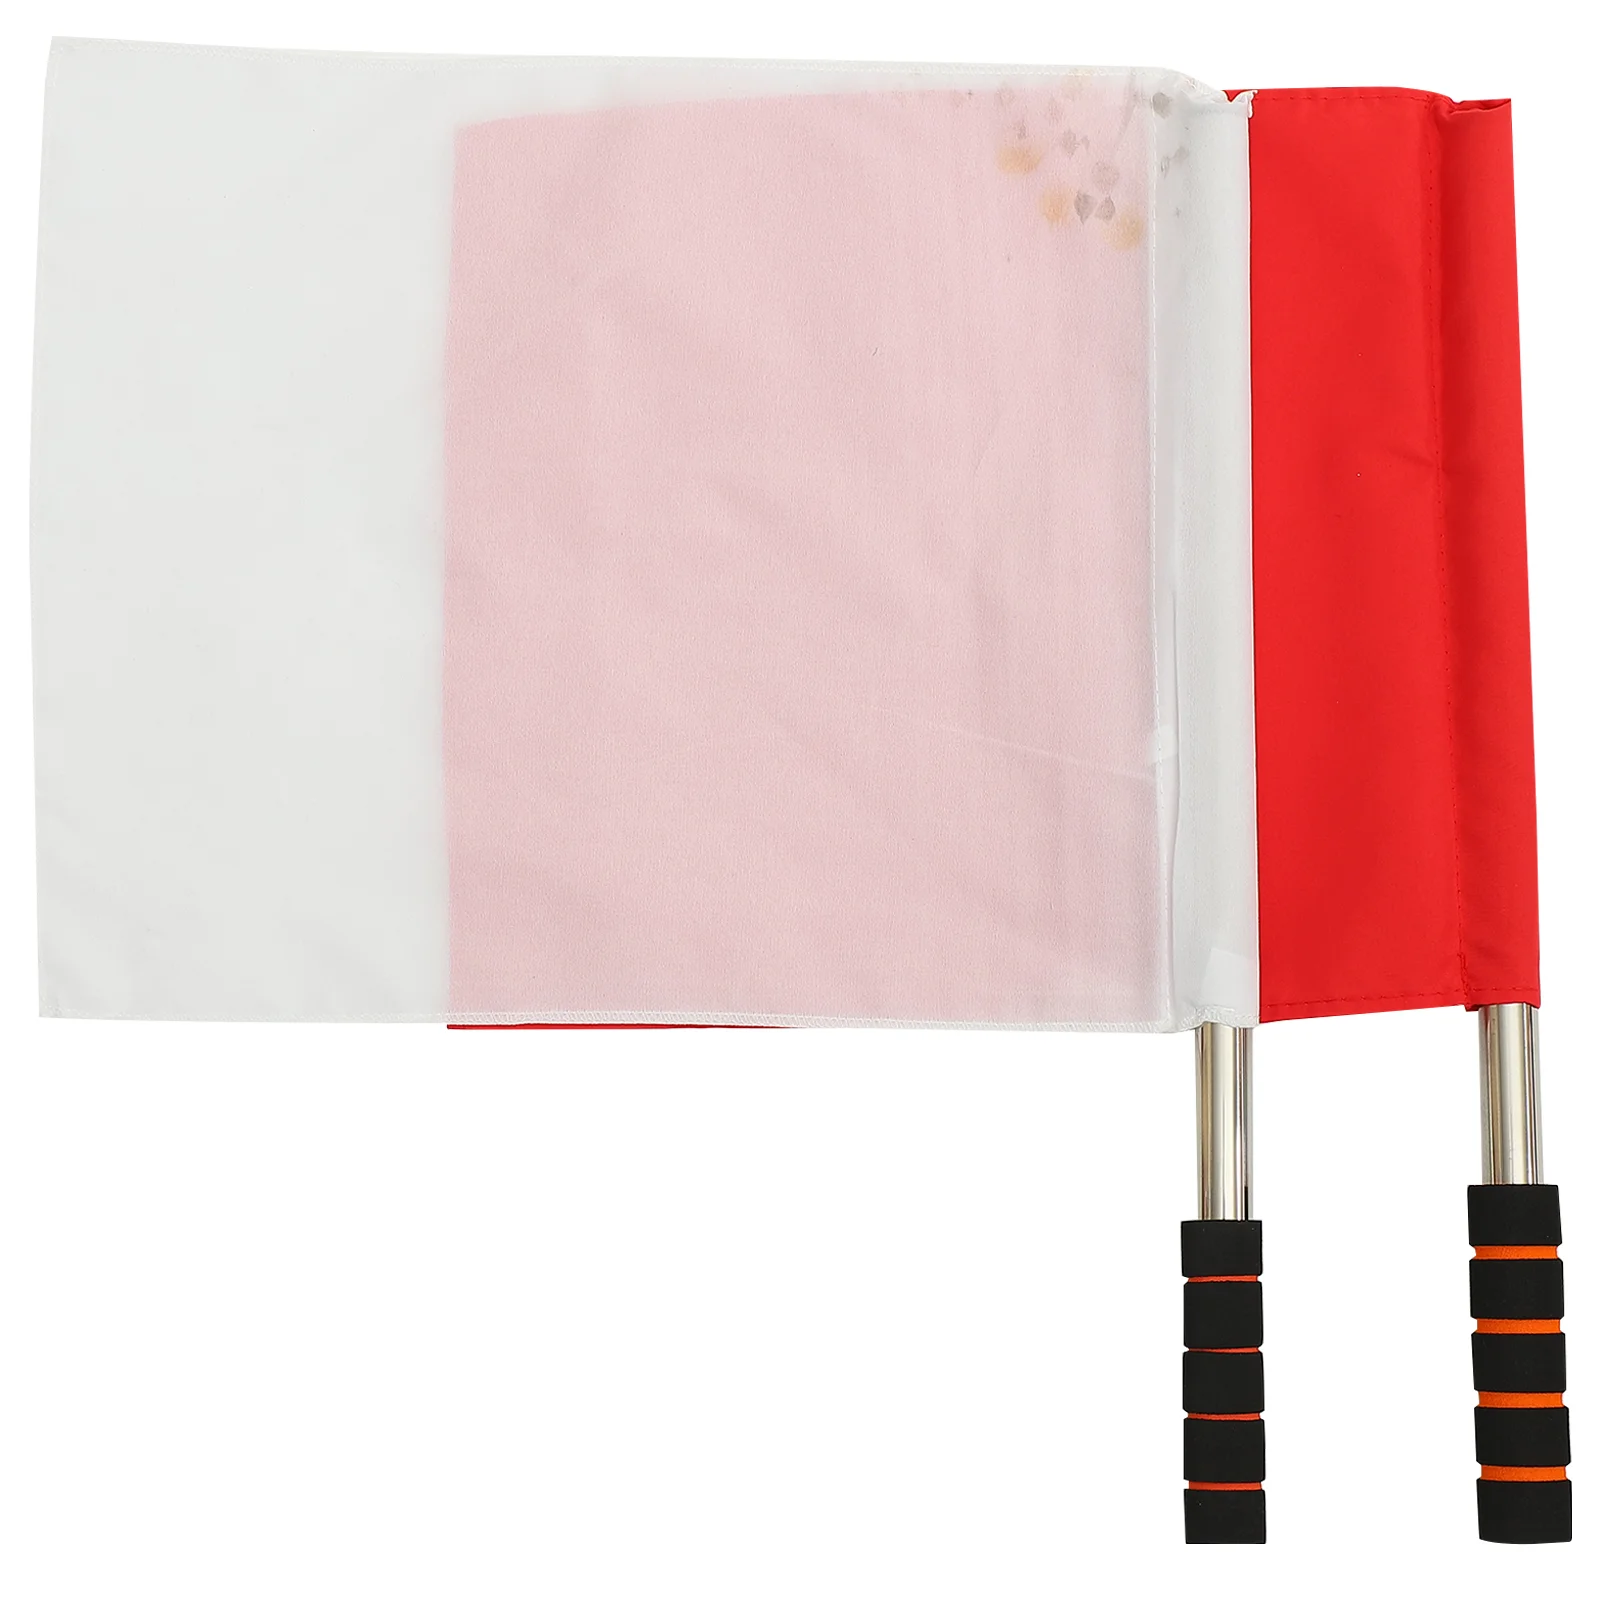 

2 Pcs Referee Border Flag Racing Flags Waving Signal Hand Stainless Steel Conducting Match Referees